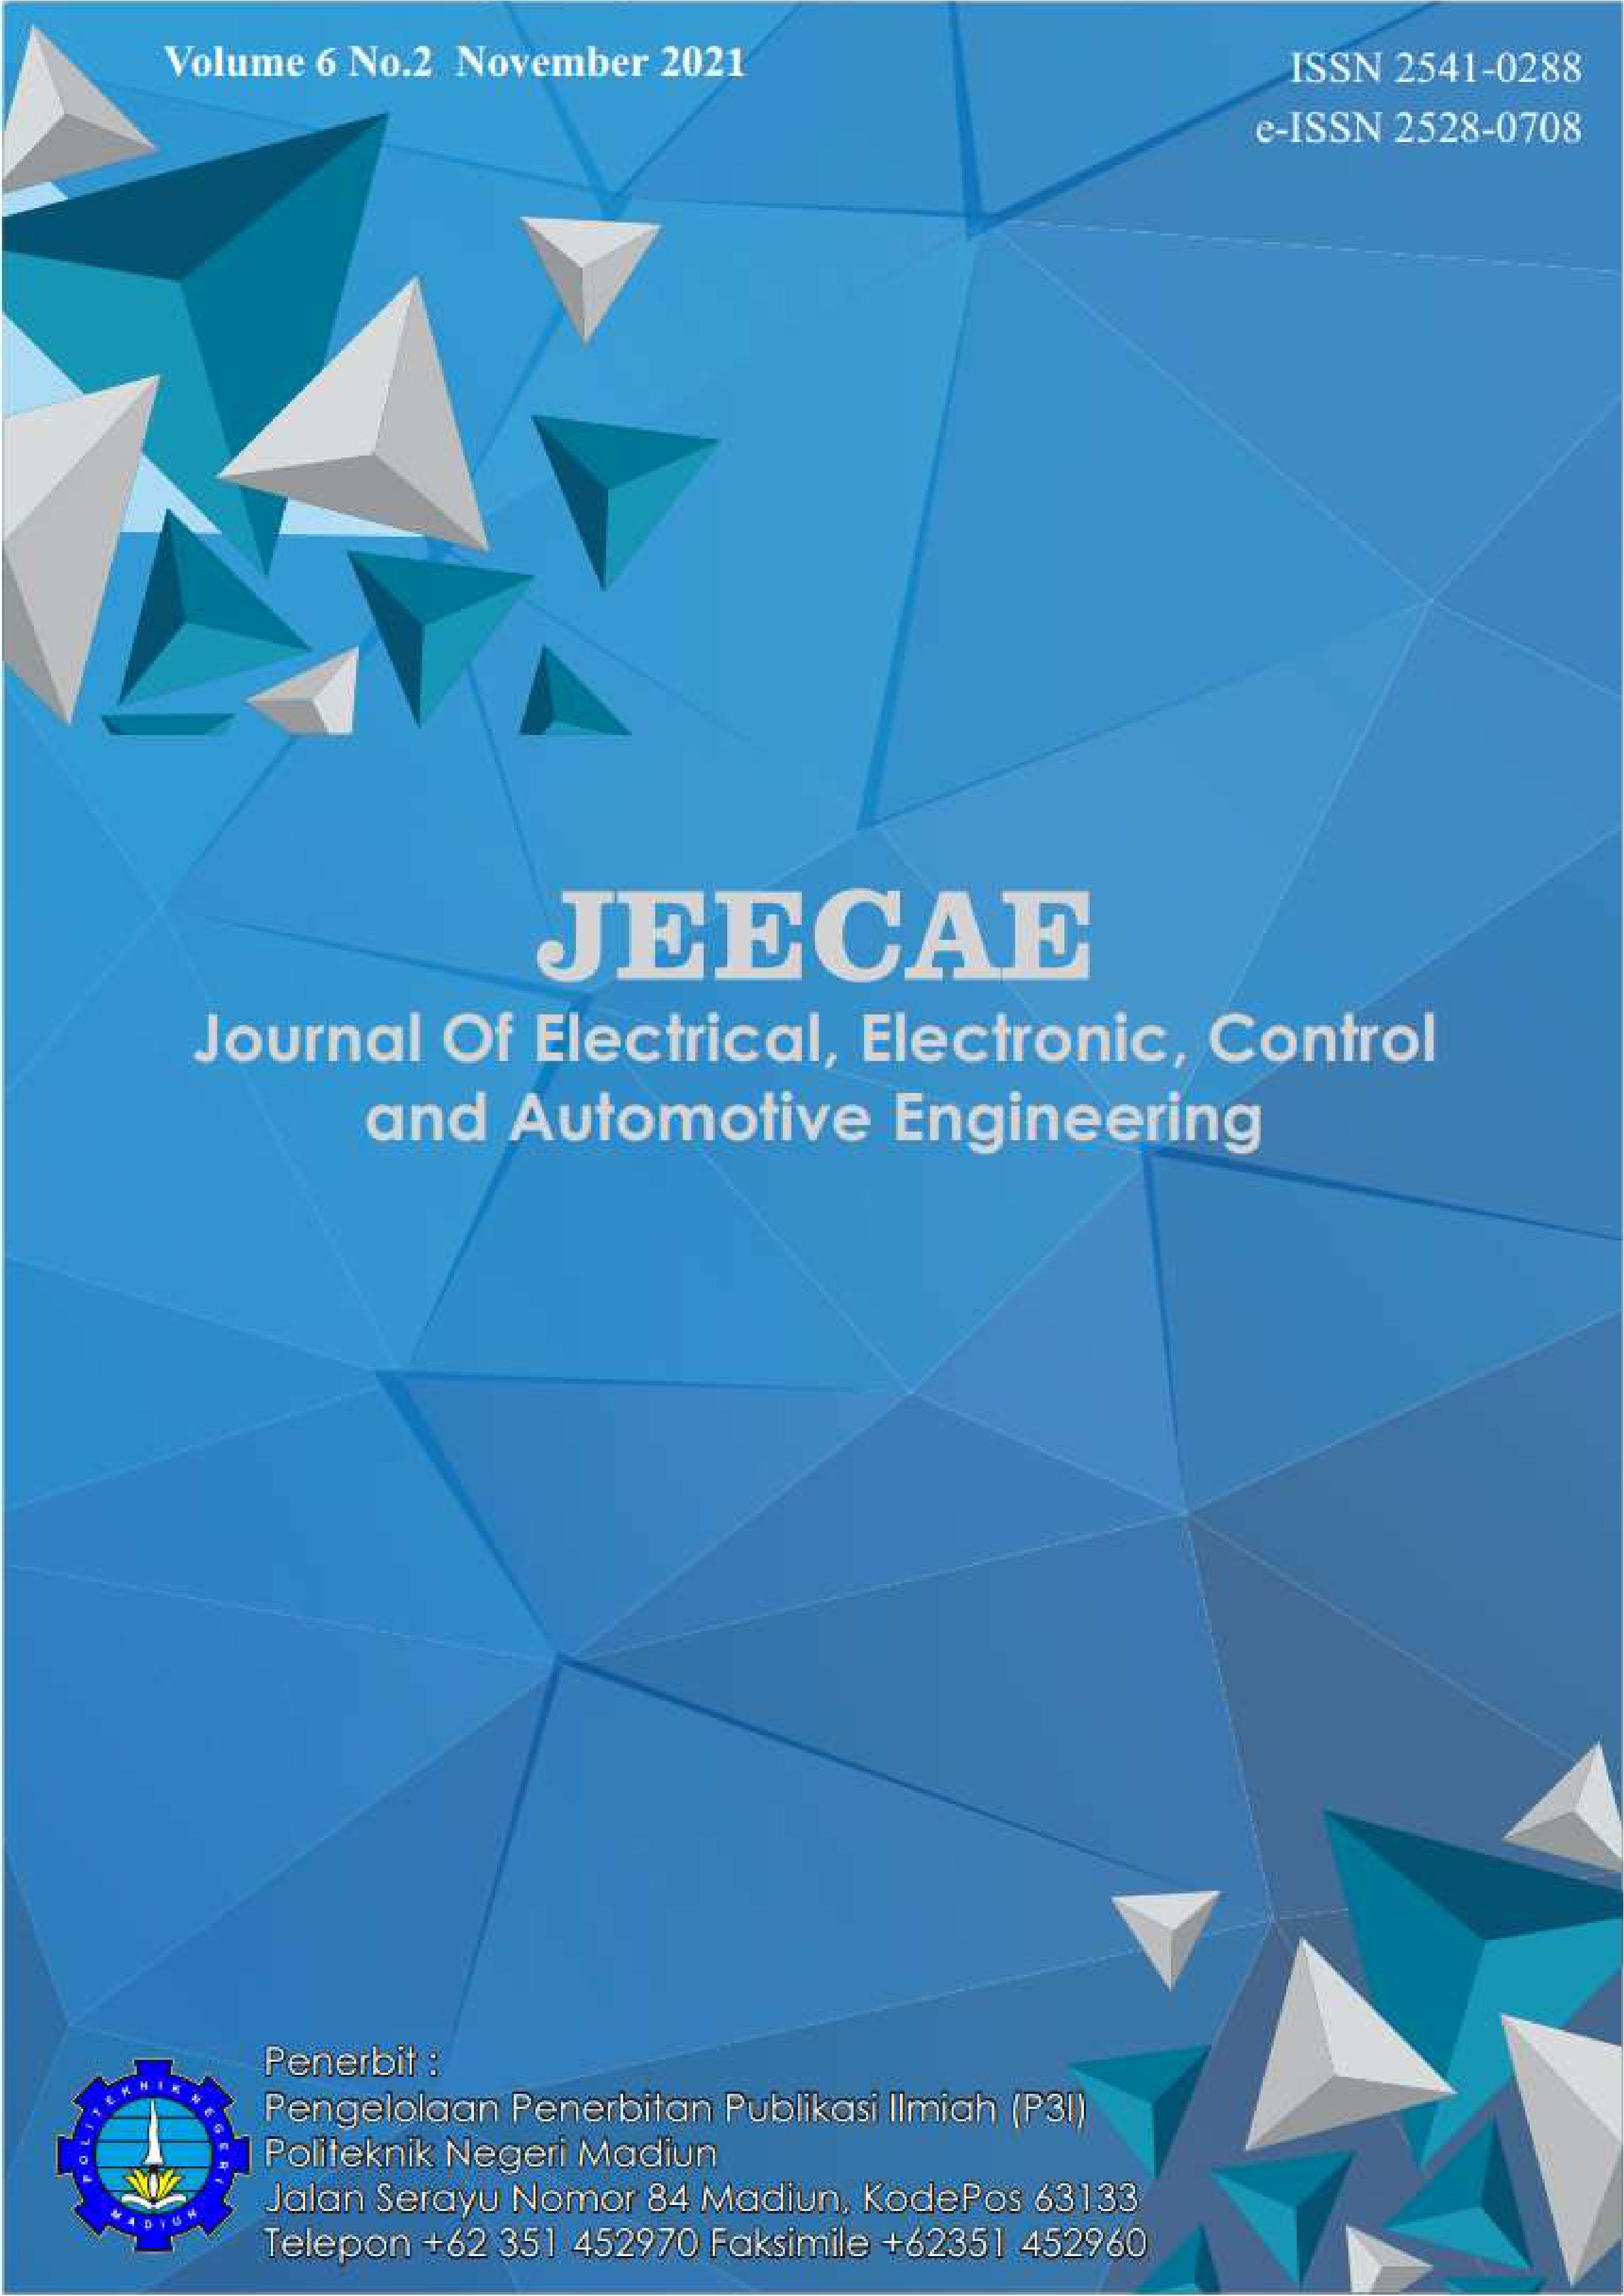 JEECAE Vol. 6, No. 2, 2021 - Front Cover